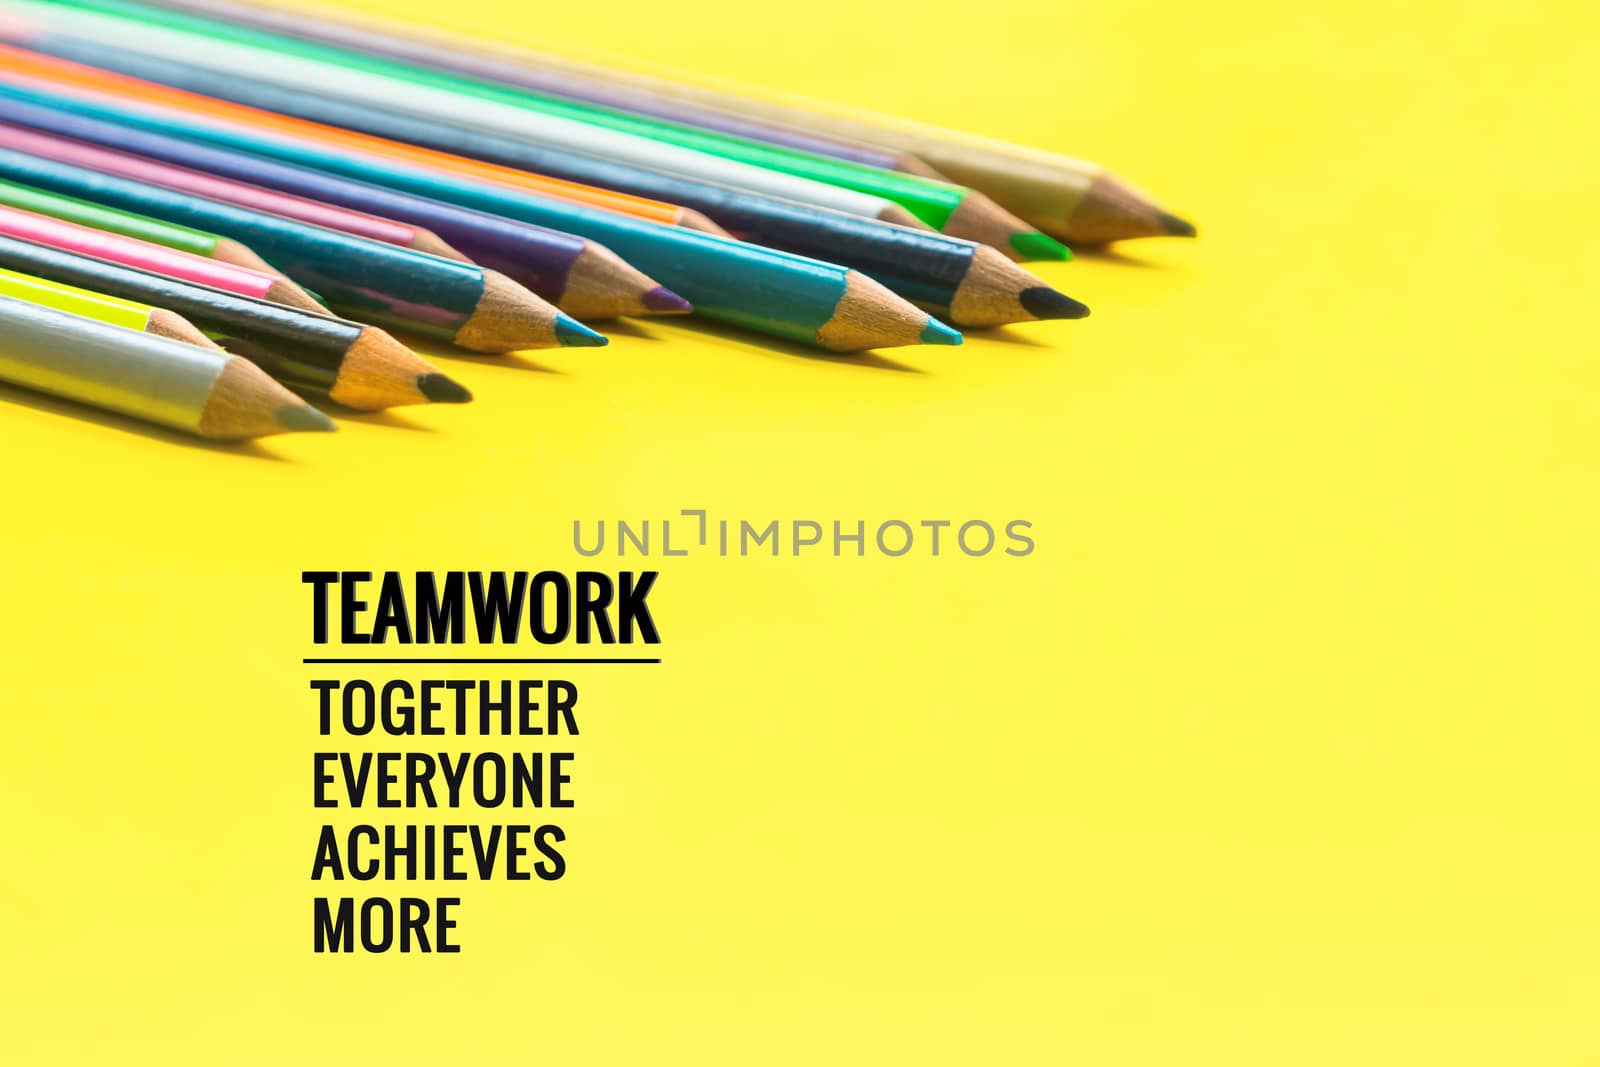 Teamwork concept. group of color pencil on yellow background with word Teamwork, Together, Everyone, Achieves and More